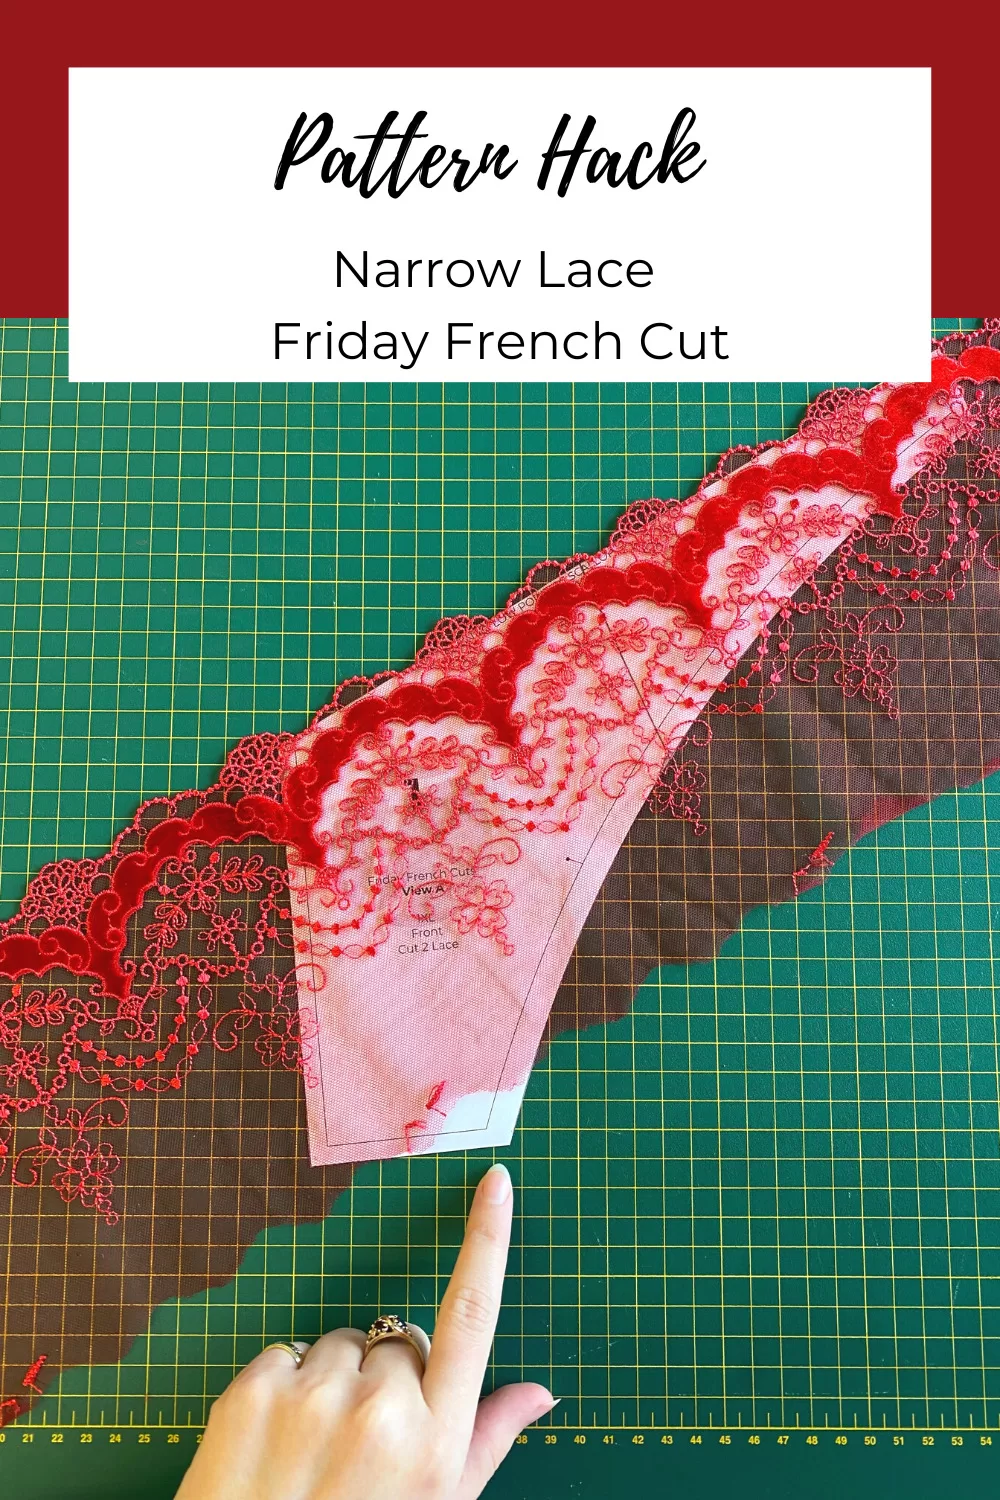 Too Narrow Lace- Friday French Cut Pattern Hack